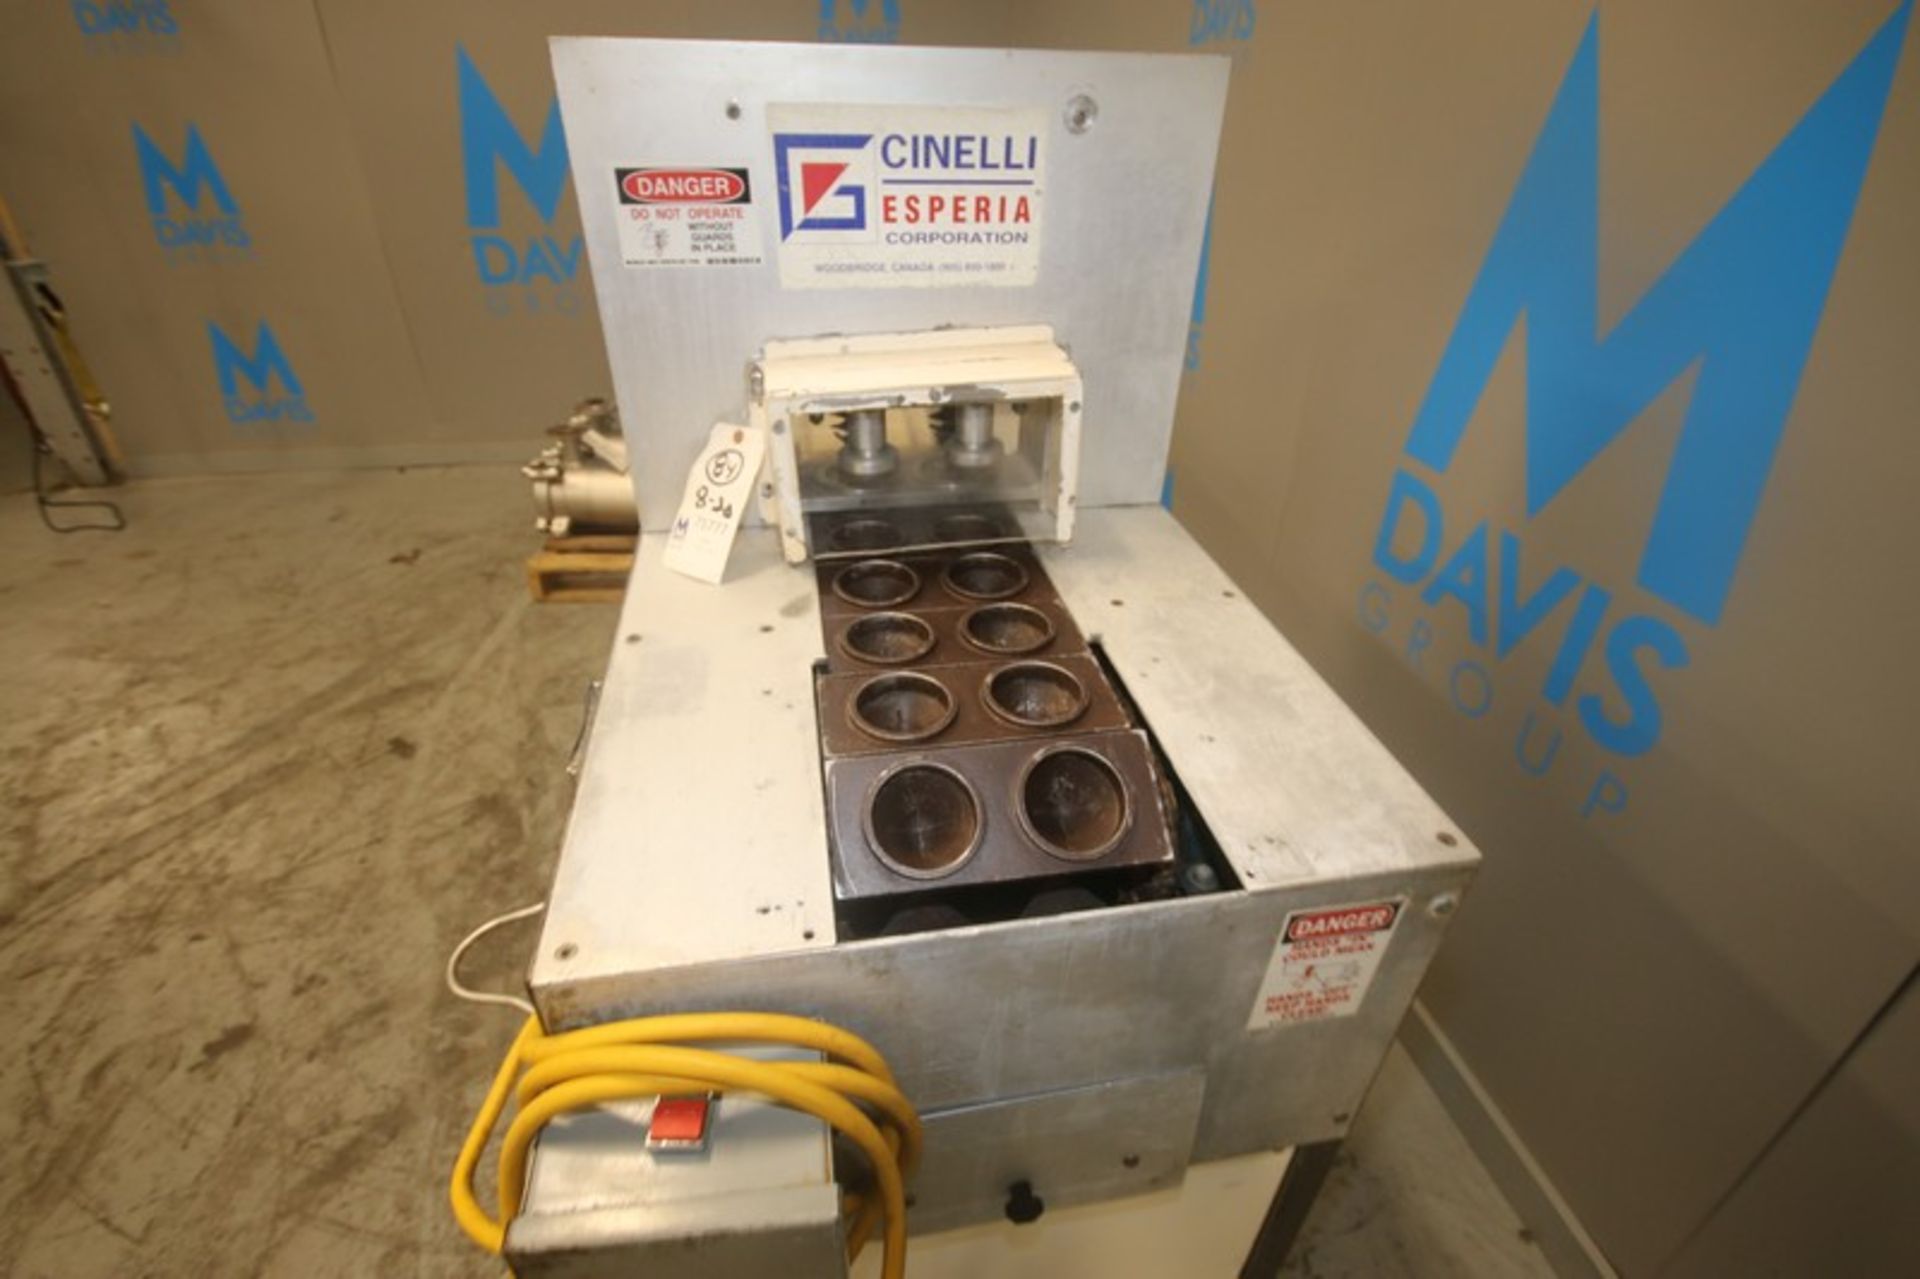 Cinelli 2-Lane Kaiser Roll Dough Press M/N CG 182, S/N 000H-774, 115 Volts, 1 Phase, with Aprox. 8- - Image 3 of 9